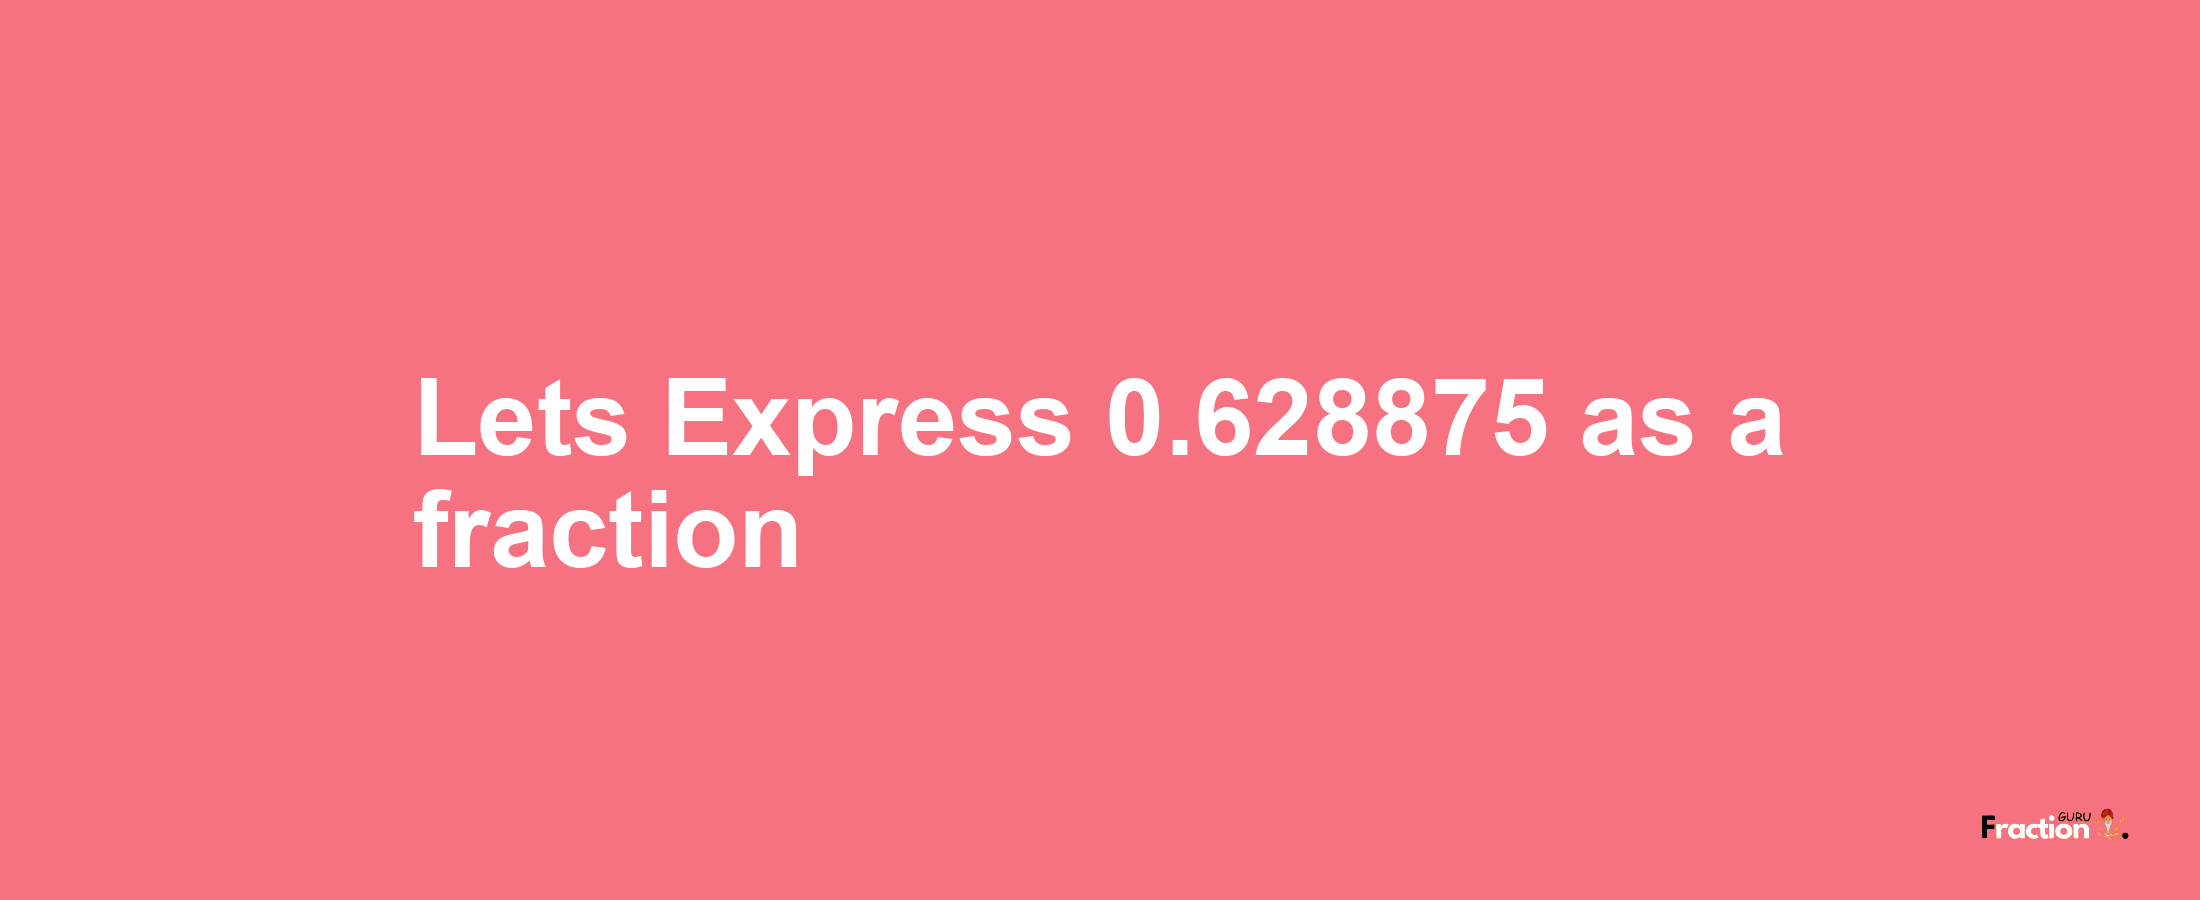 Lets Express 0.628875 as afraction